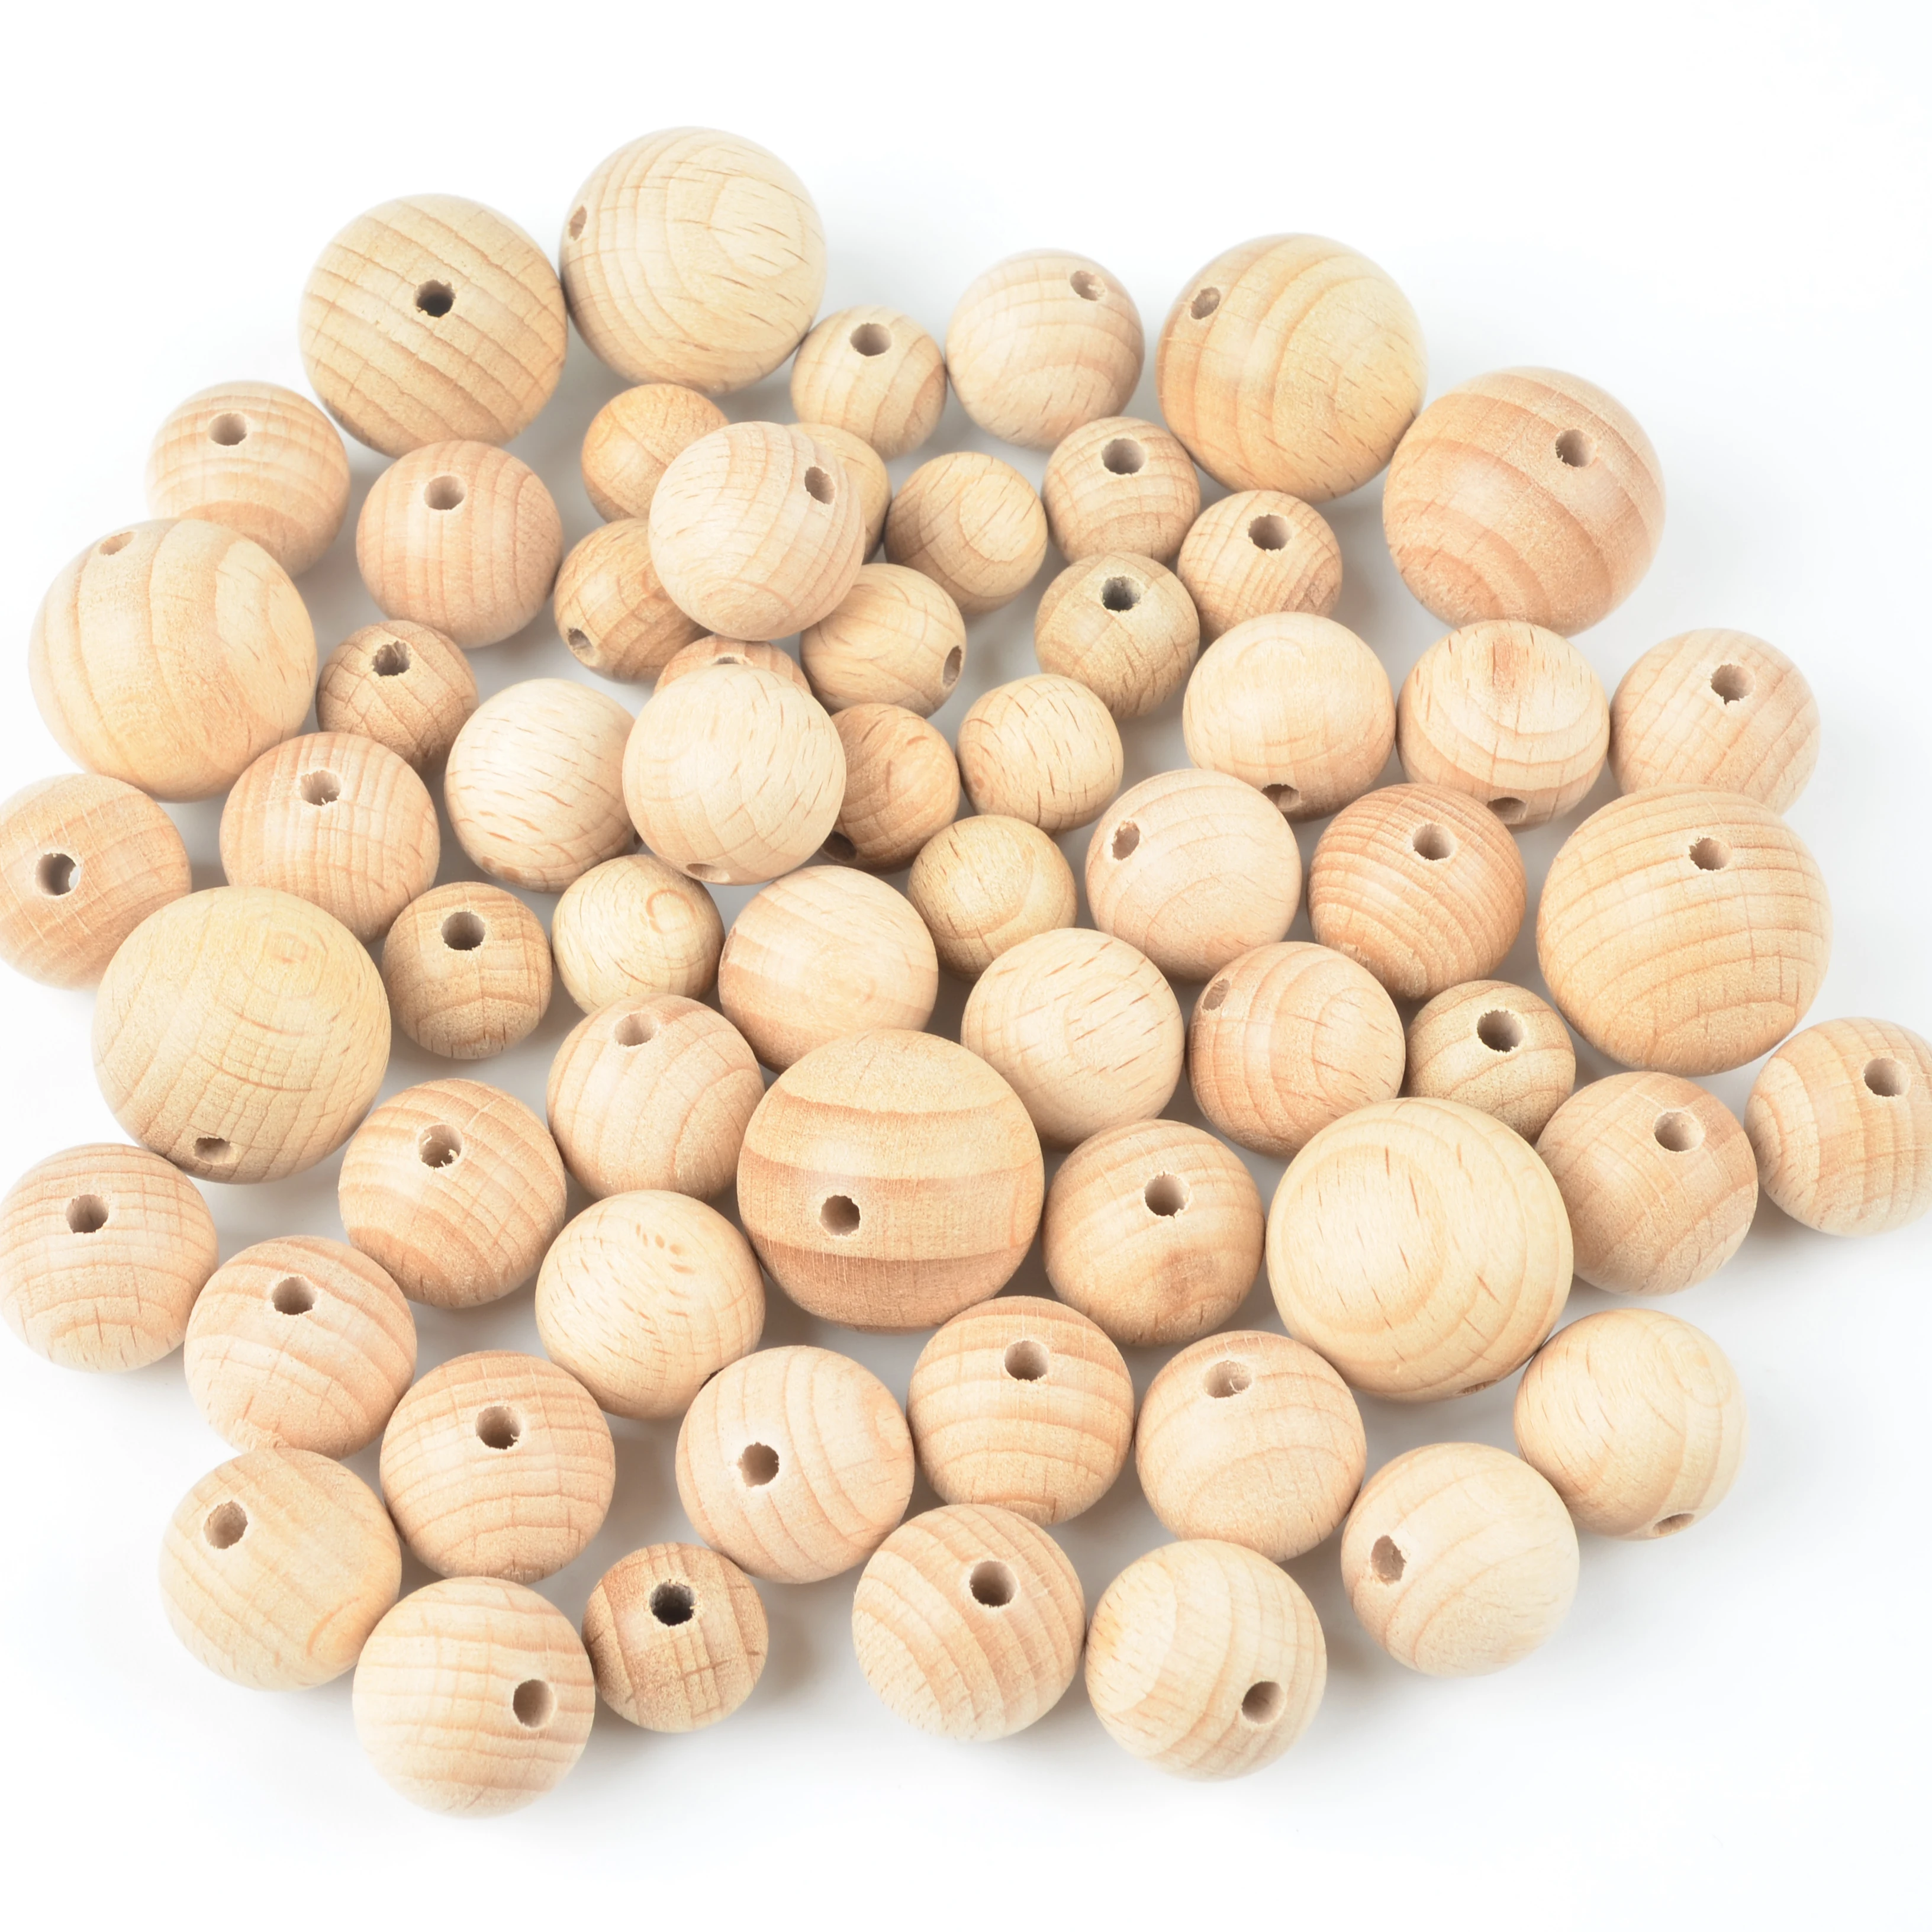 LOFCA 10pcs/lot Wooden Beads  Baby Teether Beads Toy BPA FREE Safe Food Grade Baby Natural Color DIY Jewelry Making ewelry Make images - 6